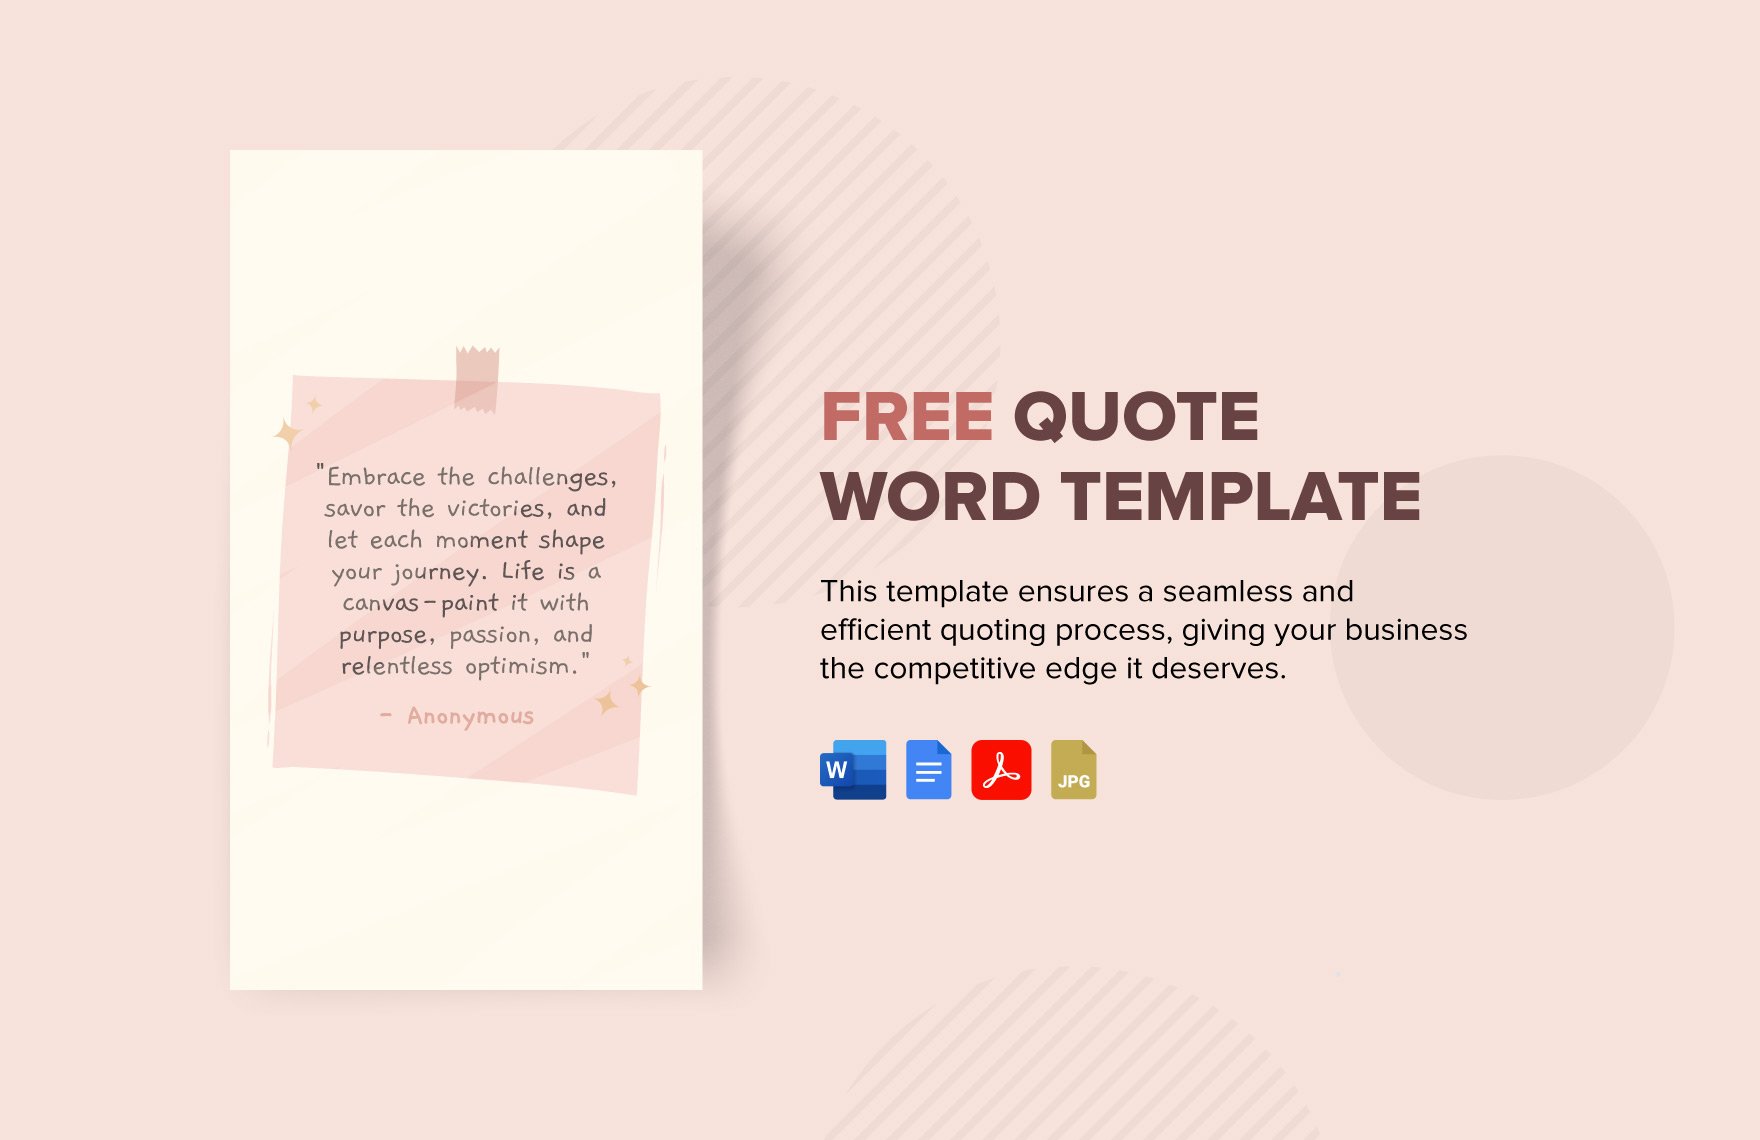 Free Quote Word Template in Word, Google Docs, PDF, JPG